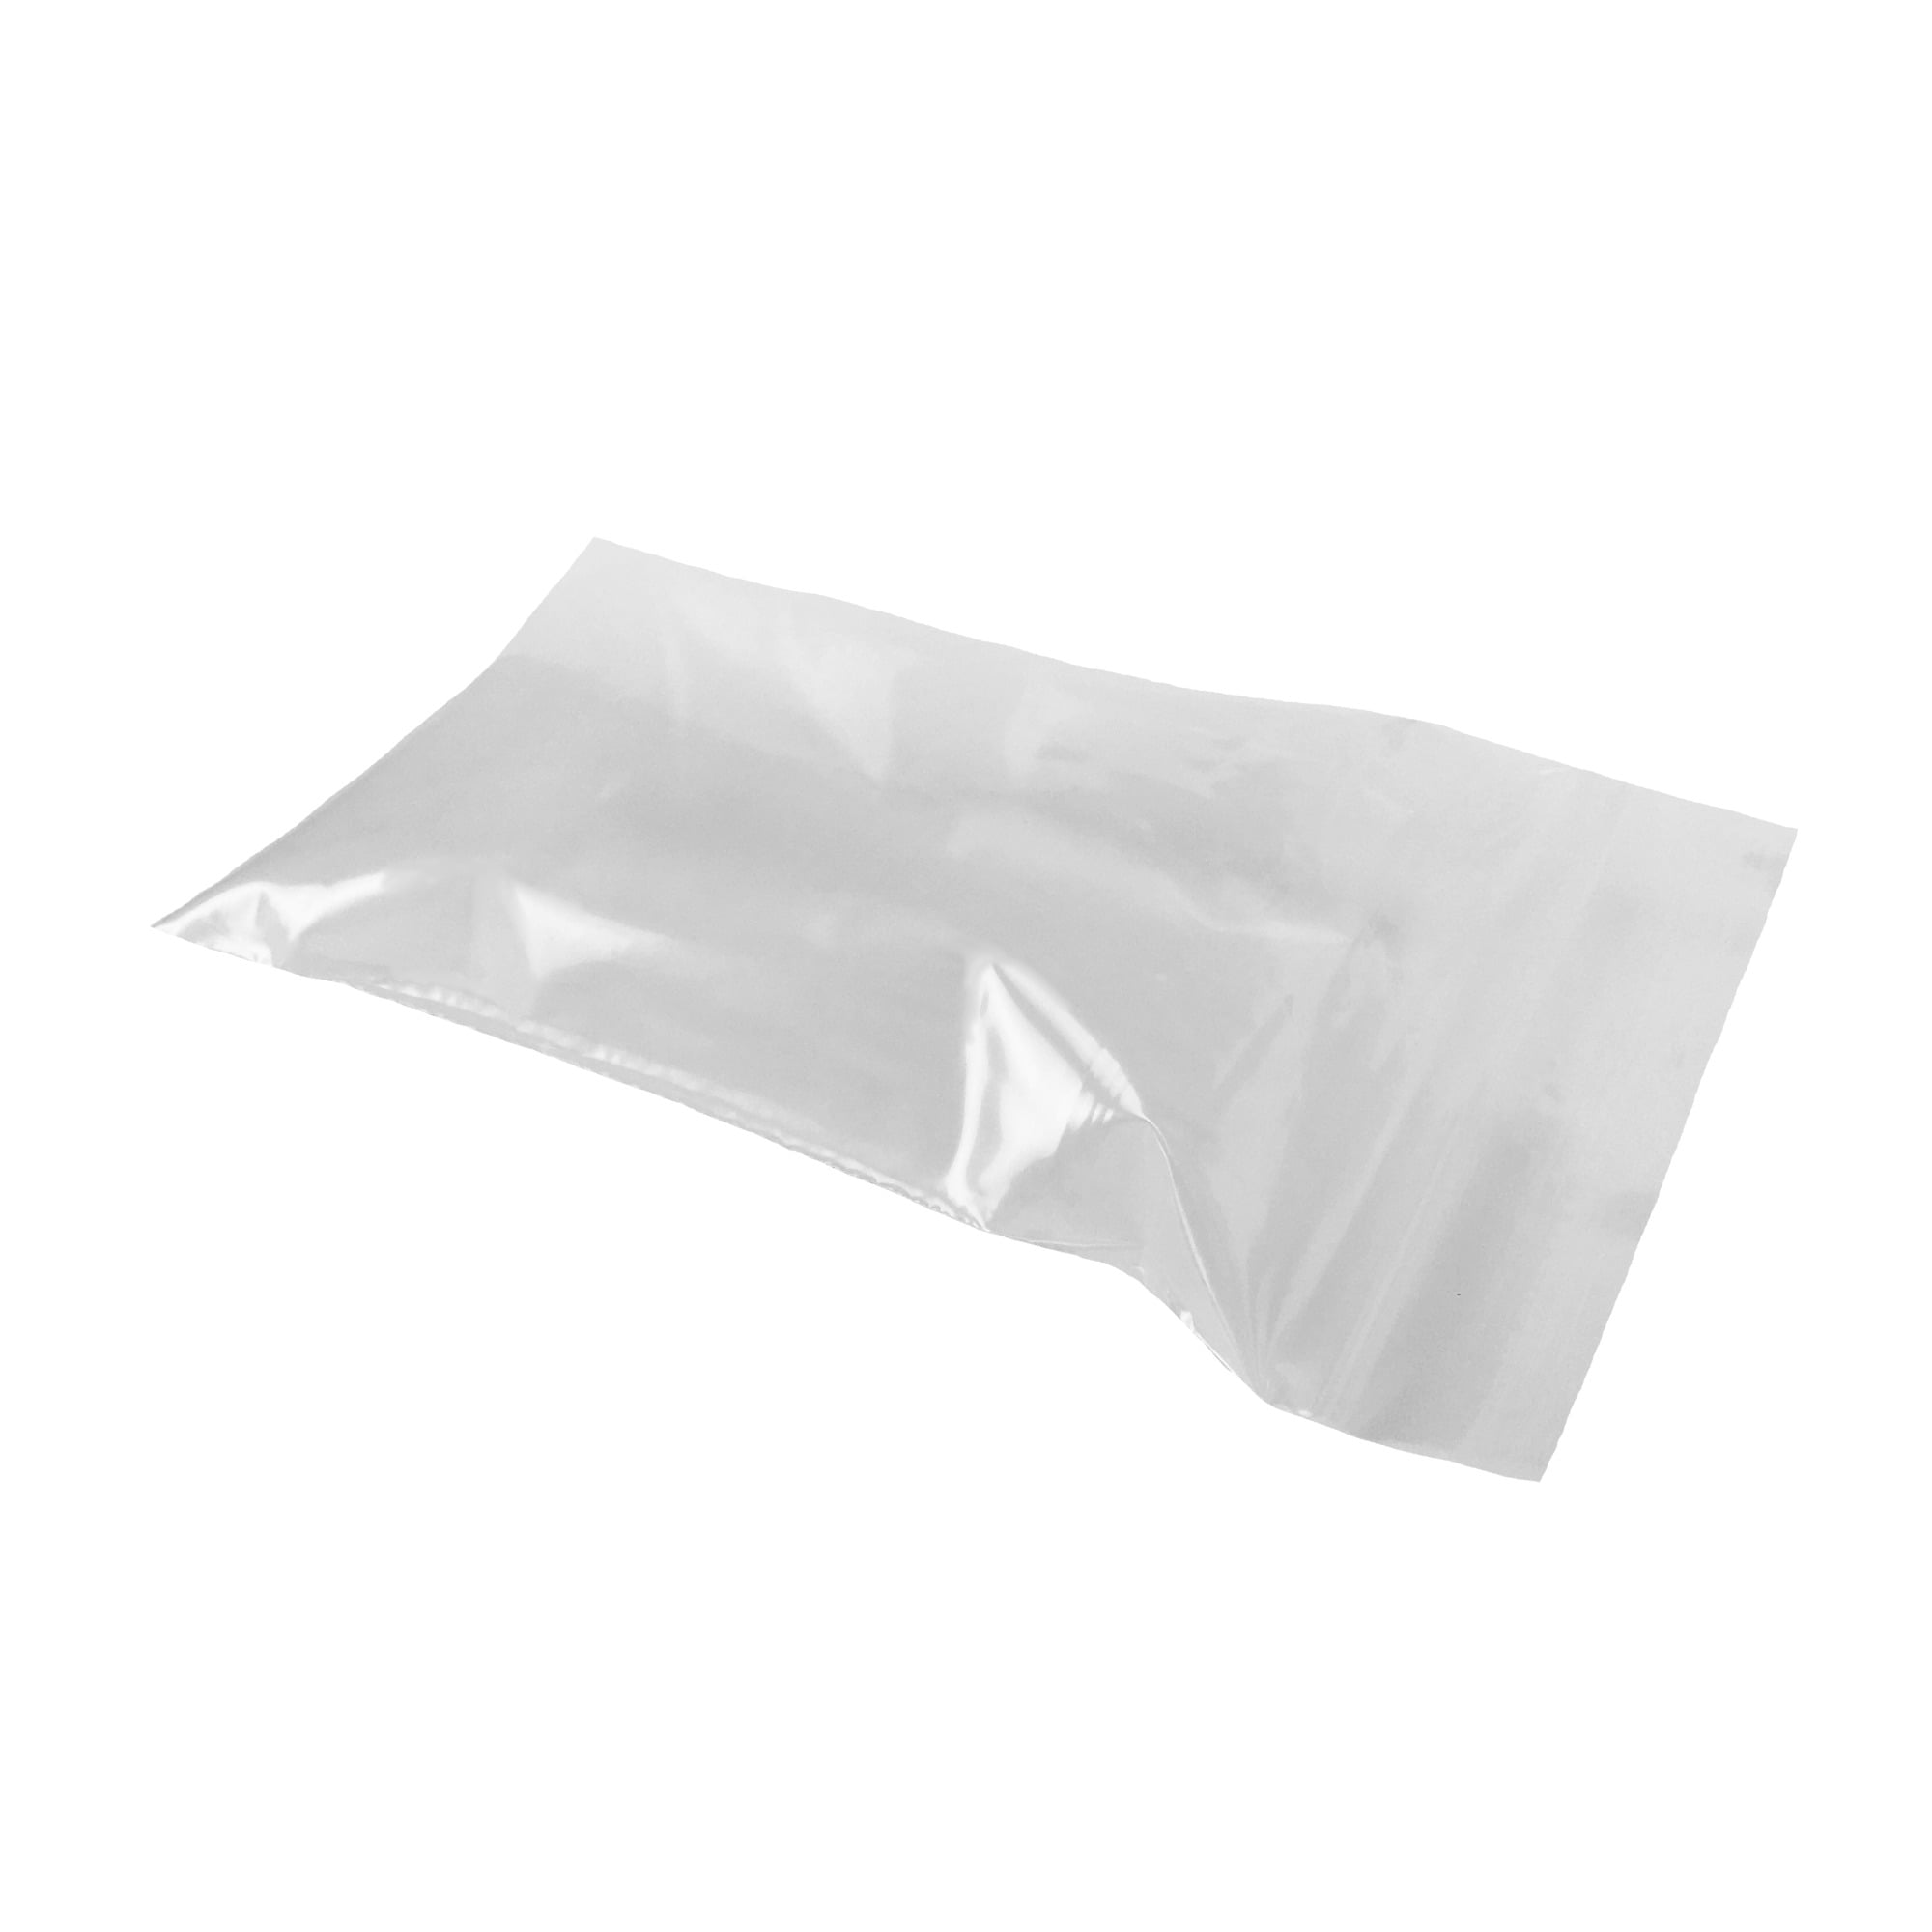 Starboxes Reclosable 8 x 10 2 Mil Clear Resealable Bags Make Moving Easier. 100 